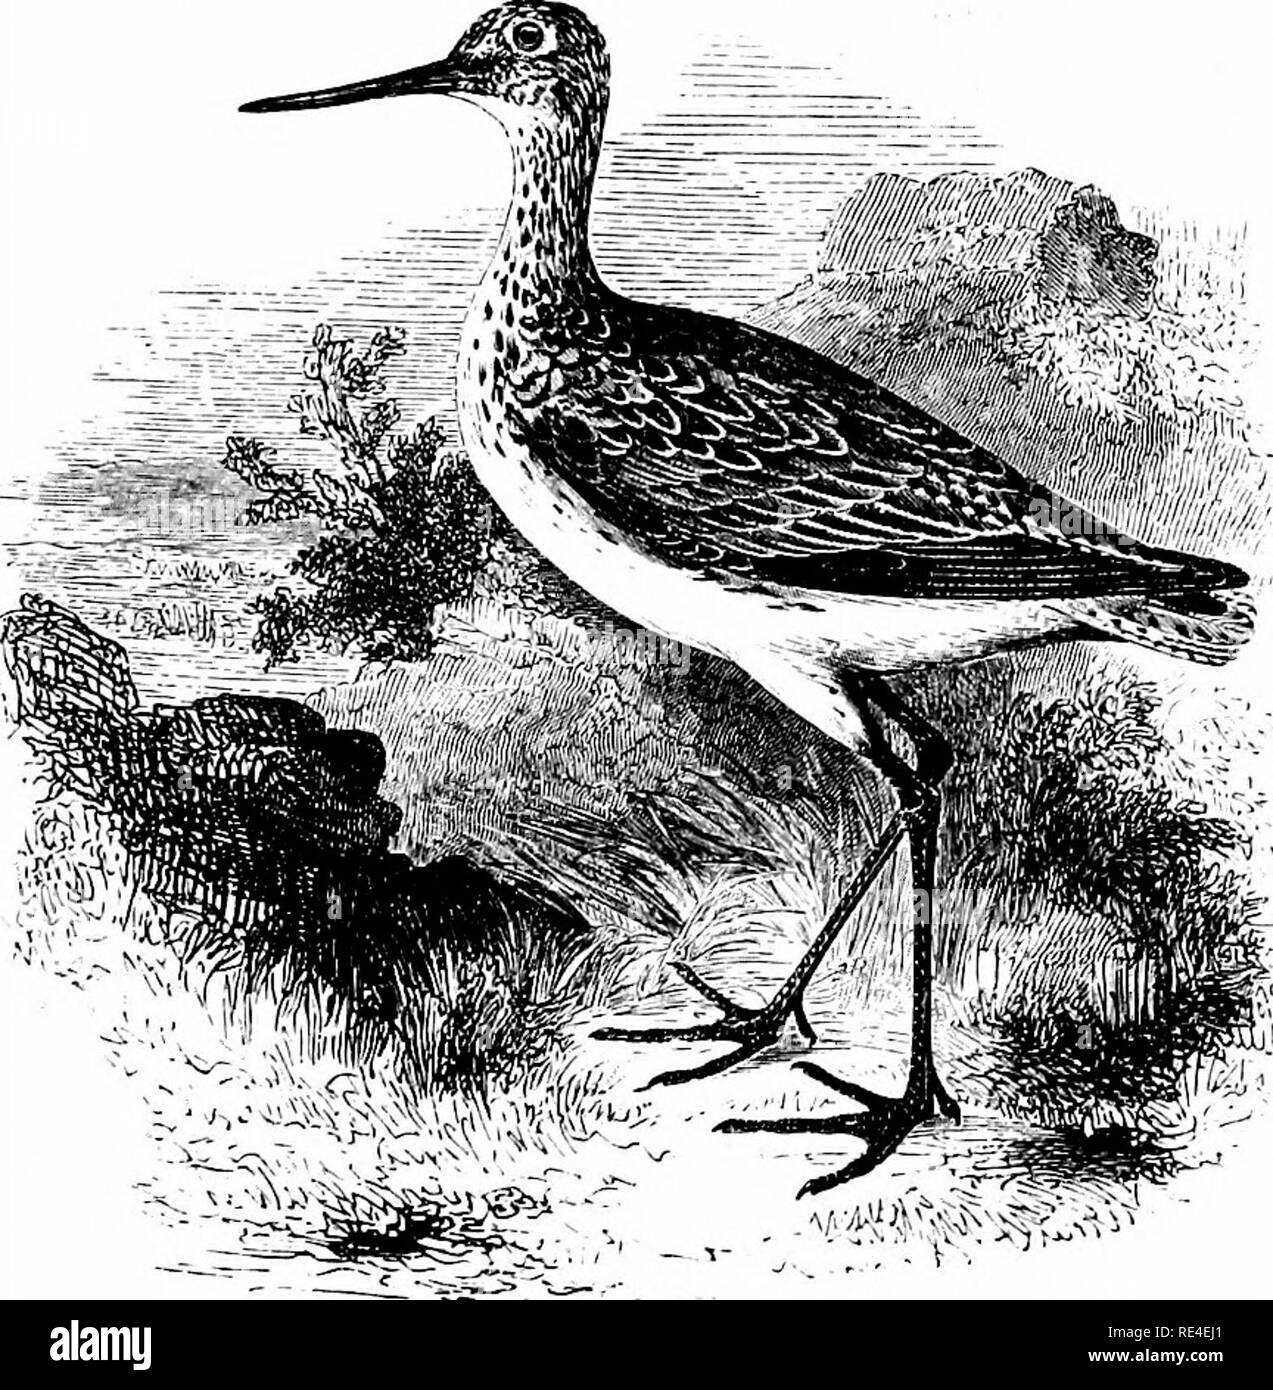 . An illustrated manual of British birds. Birds. CHARADRIID^. 619. THE GREENSHANK. ToTANUs CANESCENS (J. F. Gmelin). The Greenshank occurs annually, though in small numbers, on the shores and many of the inland waters of Great Britain during the spring and autumn migrations, but it is not very often met with in December or January. In Ireland, however, it remains through the winter (especially in cos. Mayo and Cork), until the spring, after which its absence is very brief, inasmuch as some birds appear again early in July, while the majority have arrived by the end of that month (R. Warren). I Stock Photo